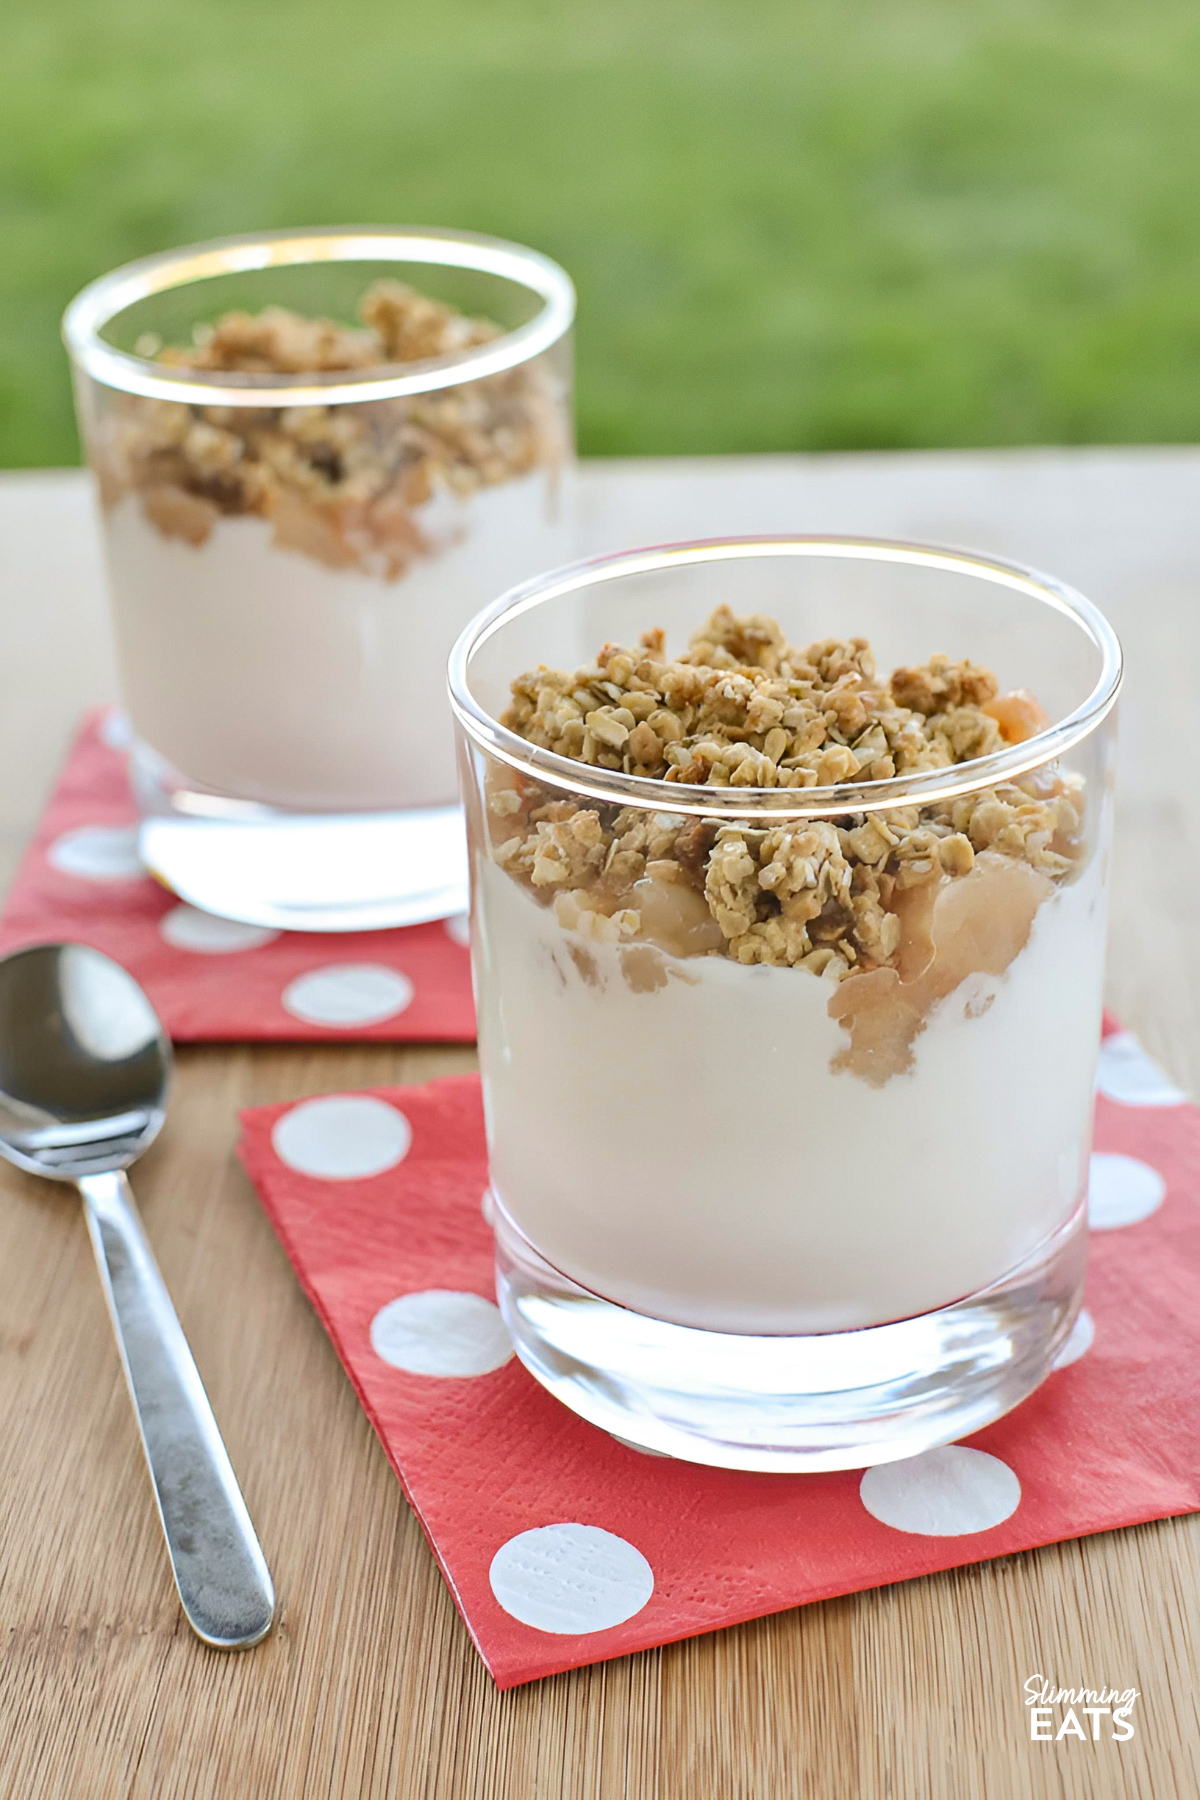 Small glasses filled with layers of pear crumble and yogurt parfaits, accompanied by a spoon, resting on a pale red napkin adorned with white polka dots